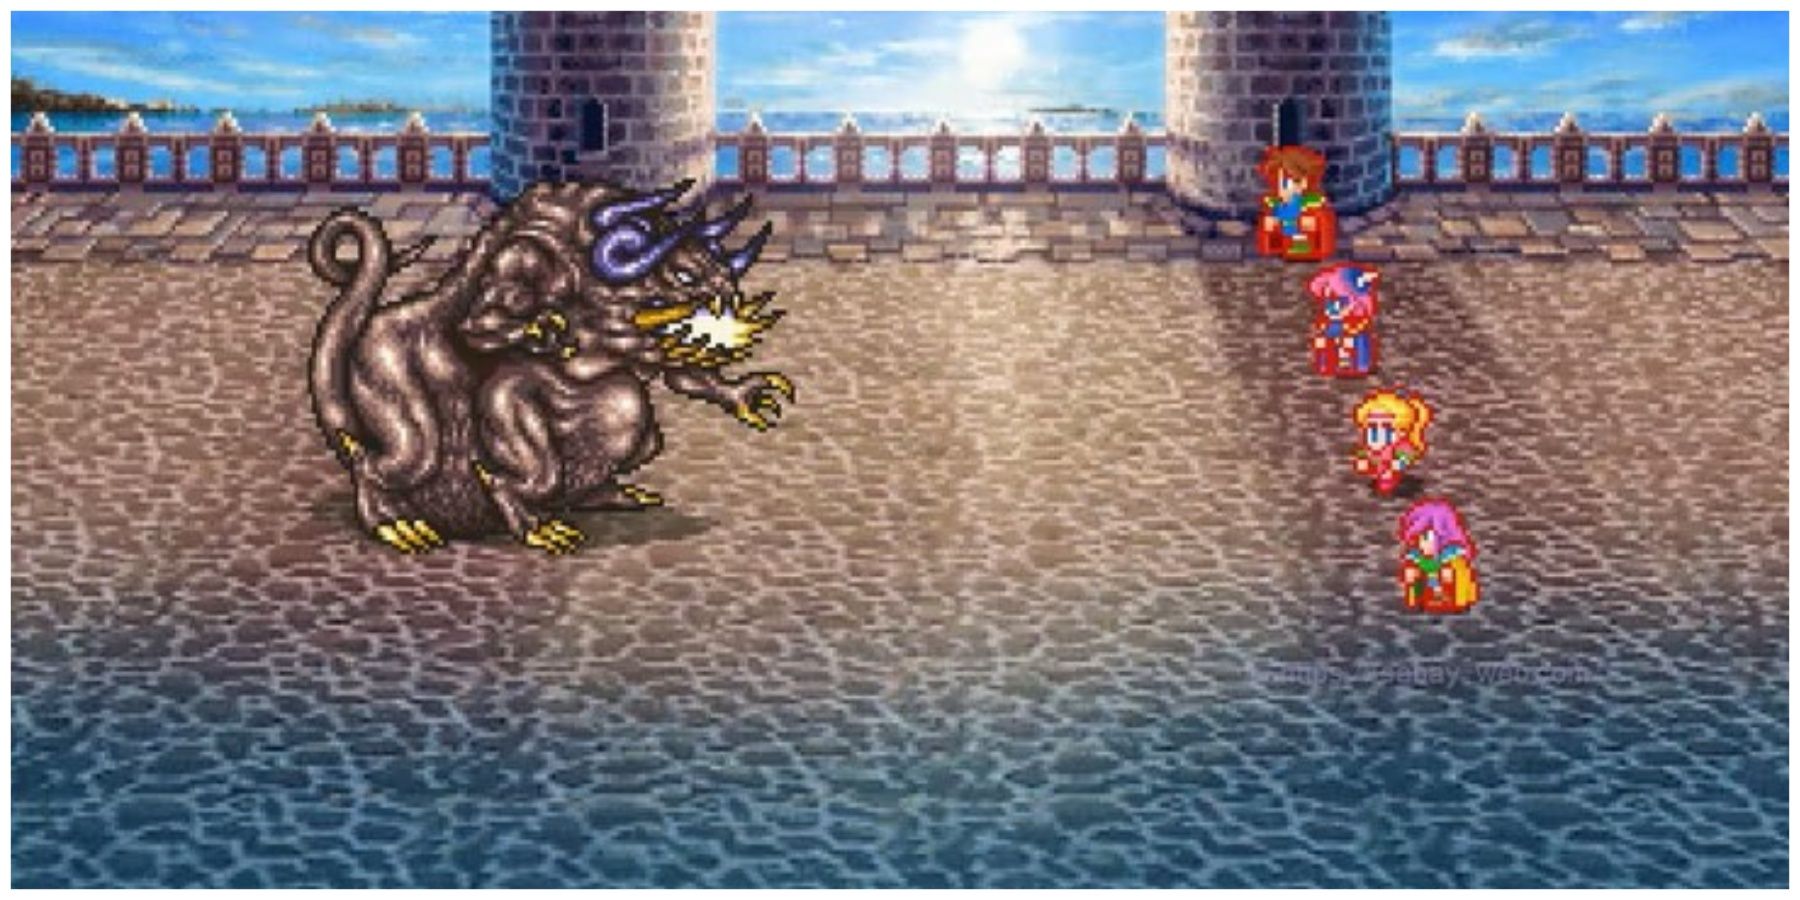 Fighting Twintania in Final Fantasy 5 to get Tinkerbell